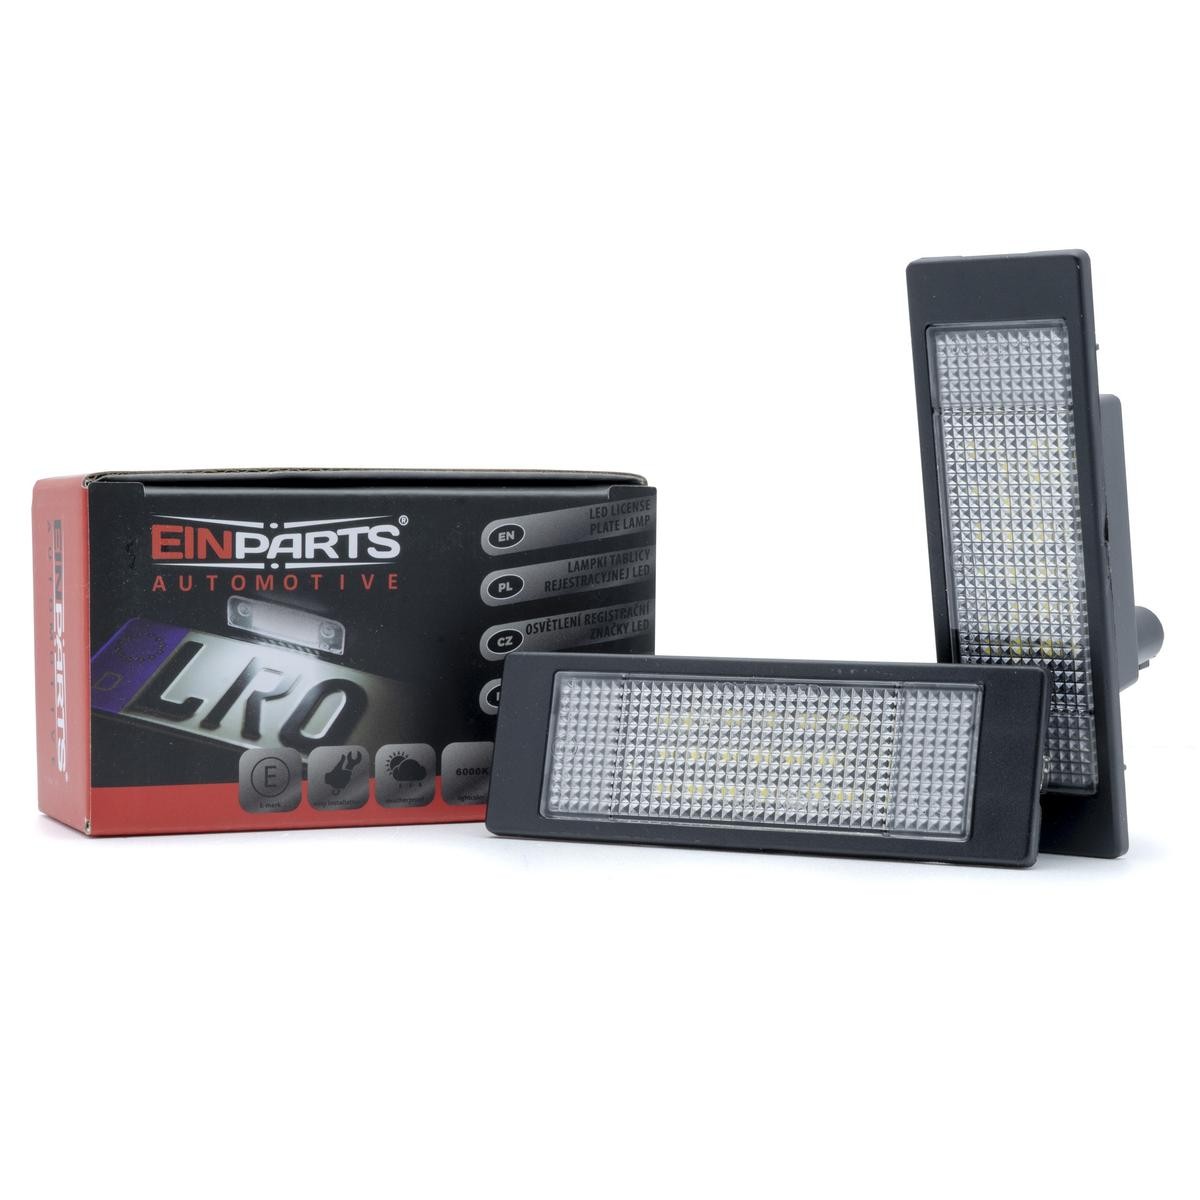 BMW 6 Series Licence Plate Light EINPARTS EP93 cheap